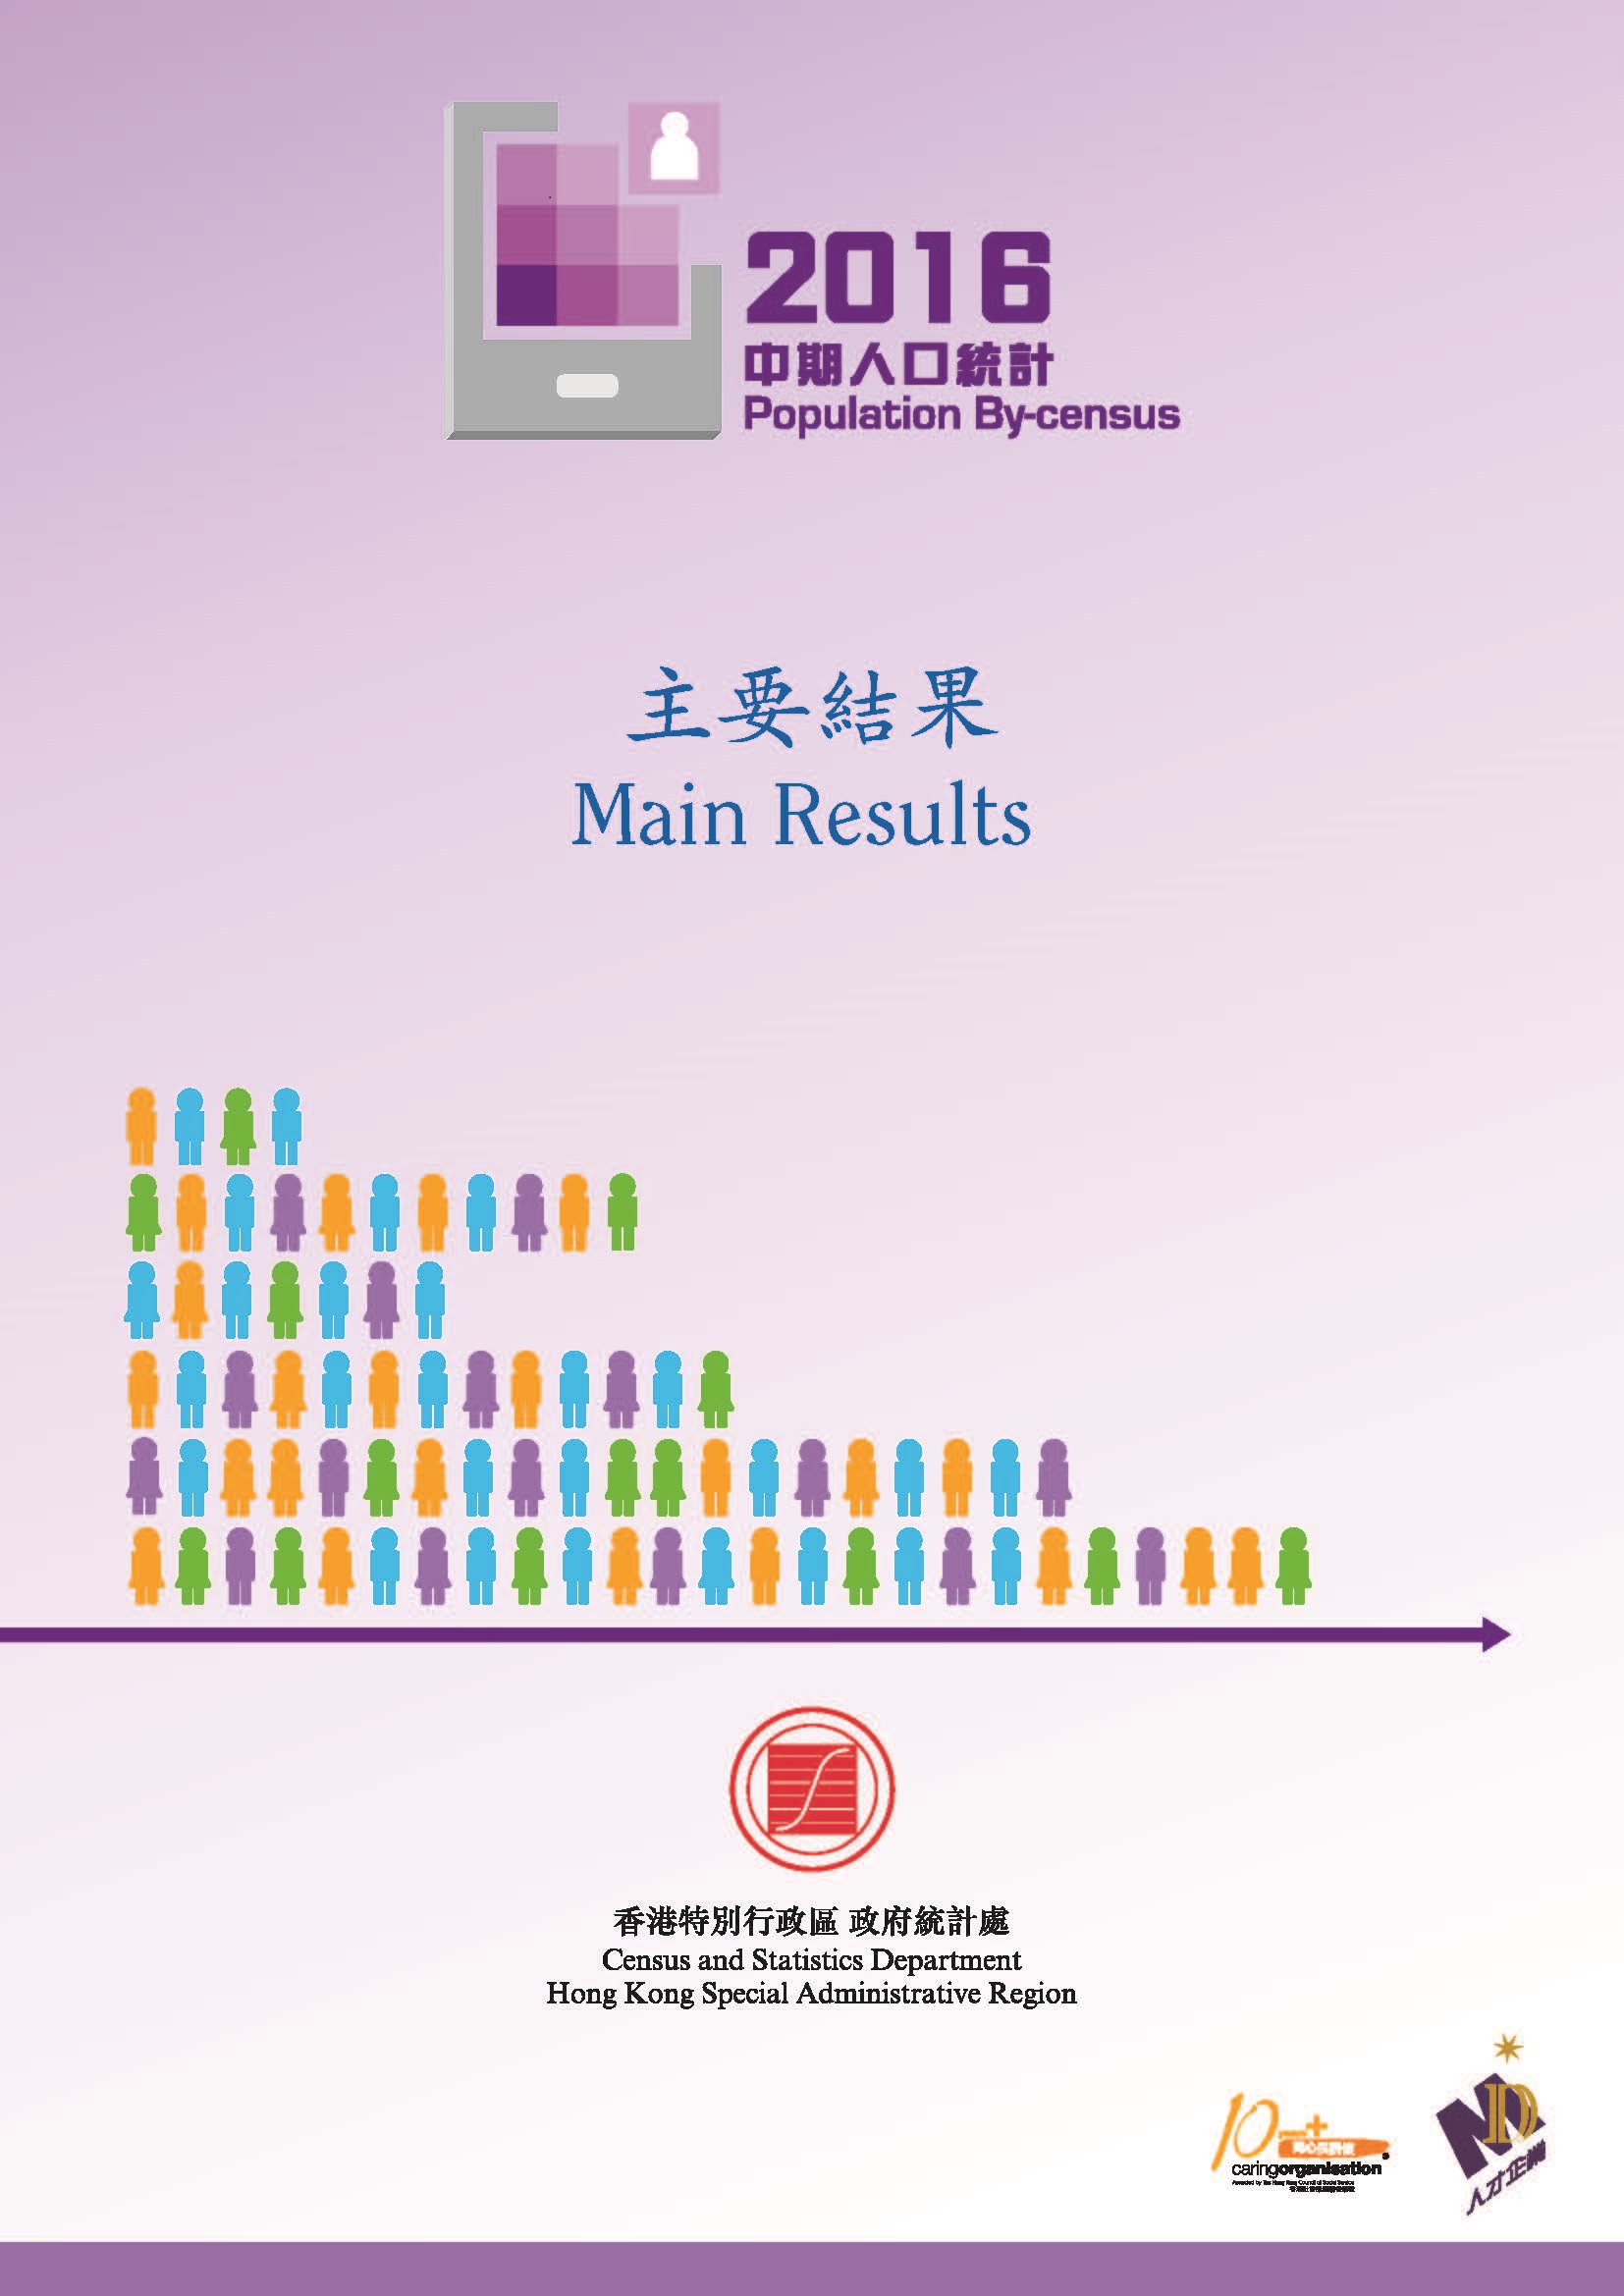 2016 Population By-census - Main Results